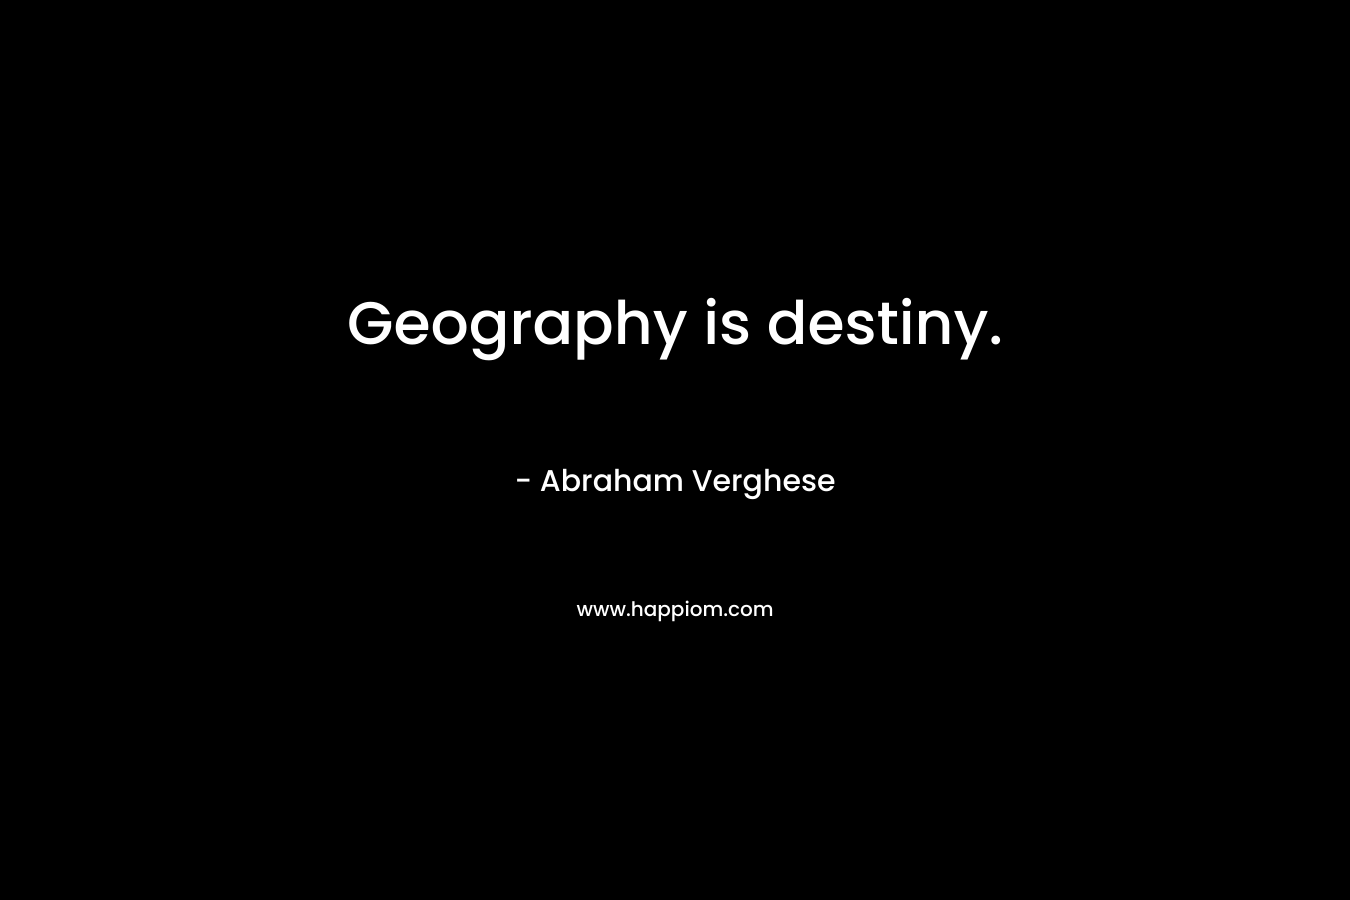 Geography is destiny.